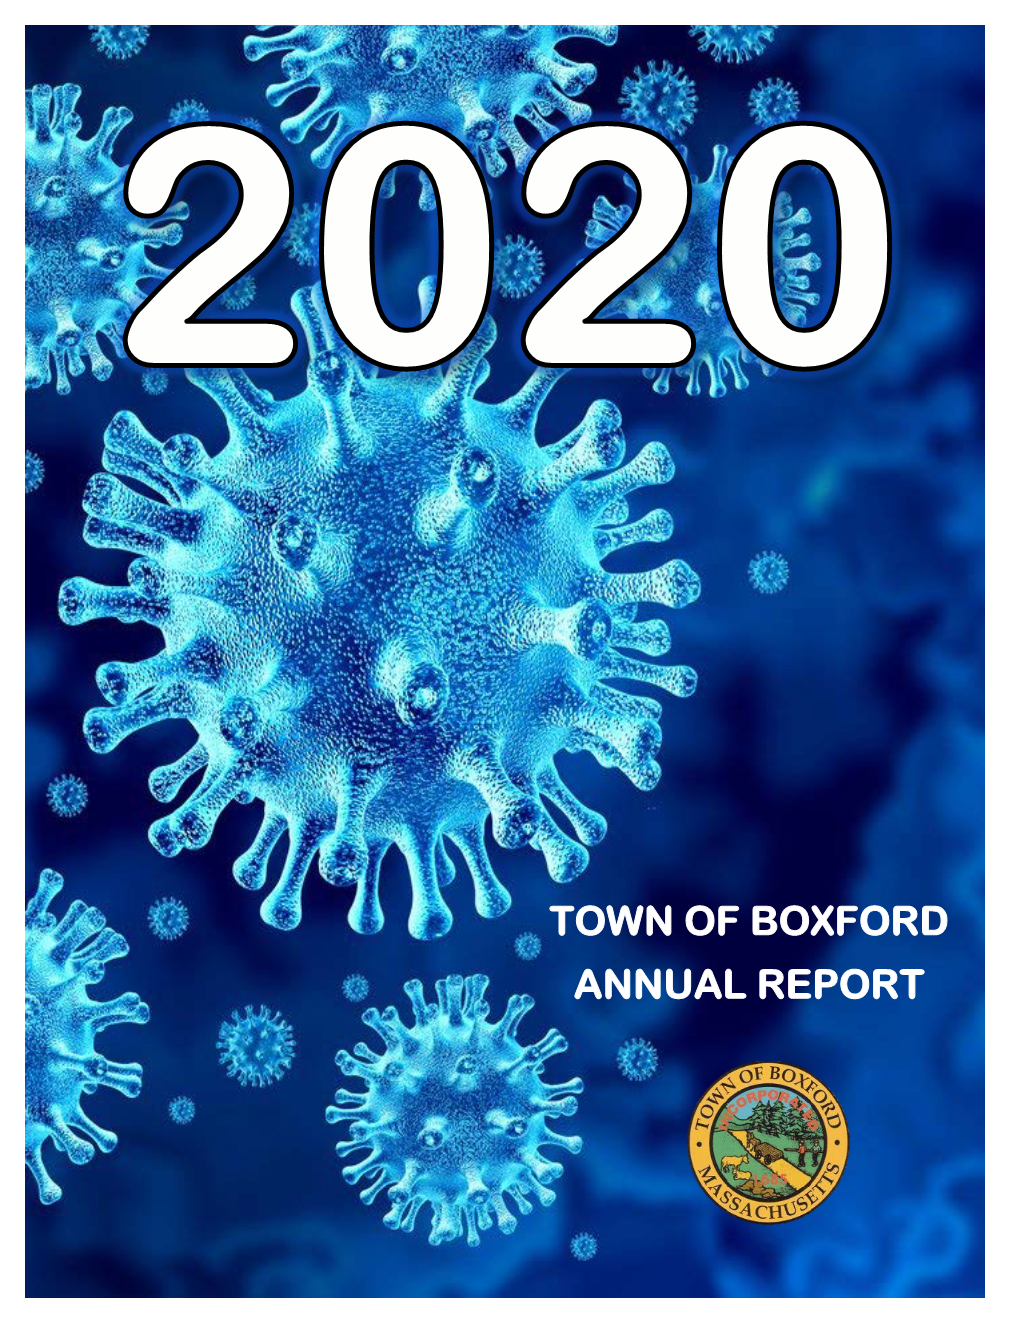 Town of Boxford Annual Report 2019 TOWN of BOXFORD